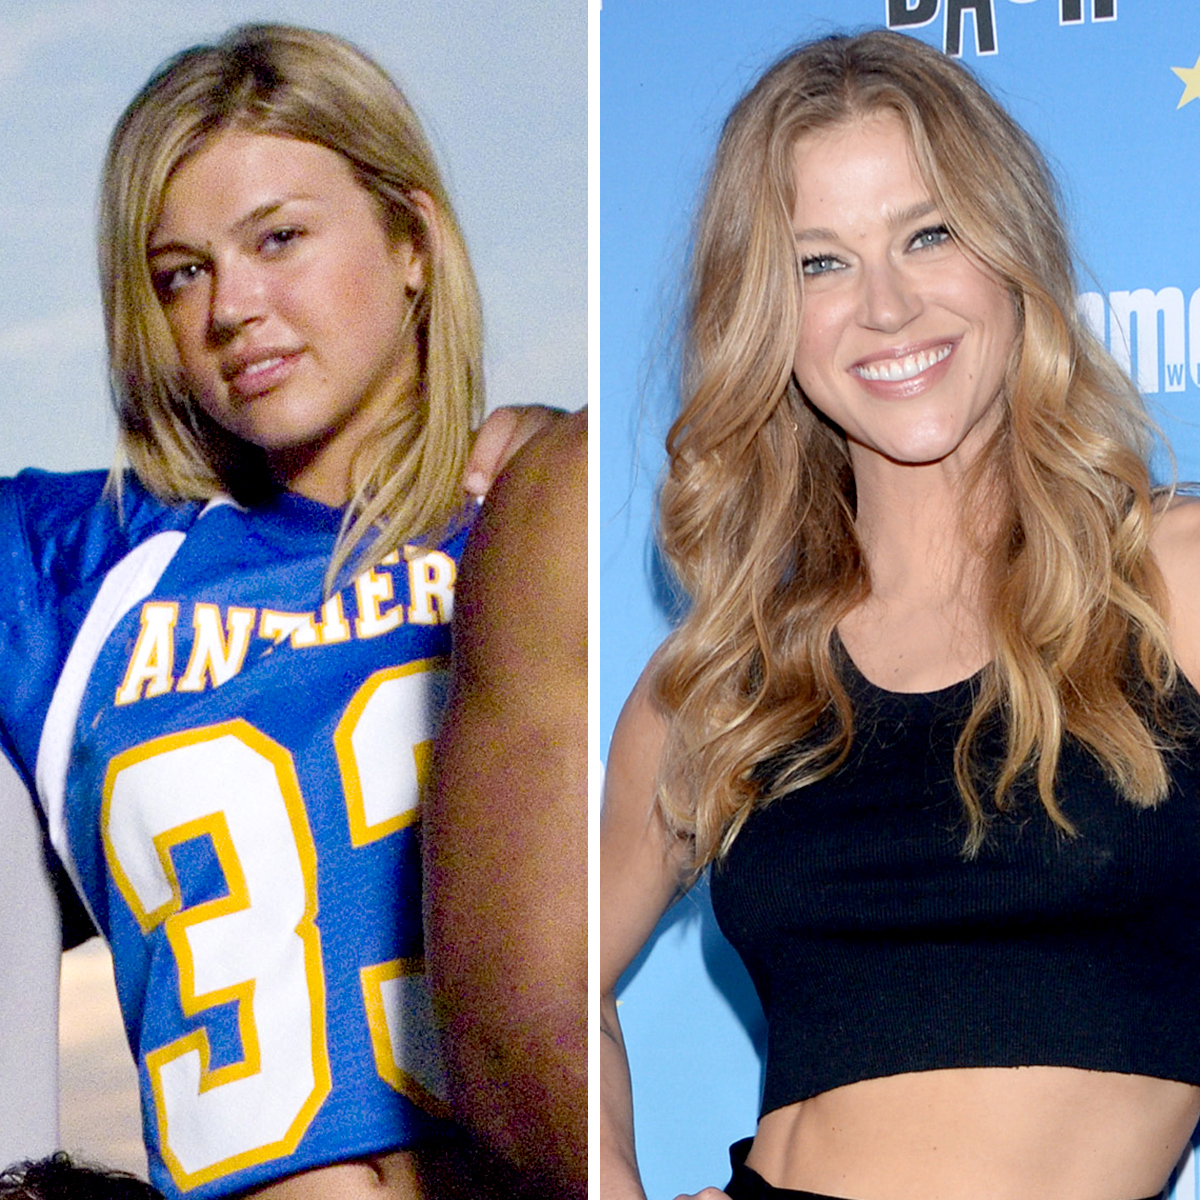 What the Friday Night Lights Cast Looks Like Now - FNL Cast Then and Now